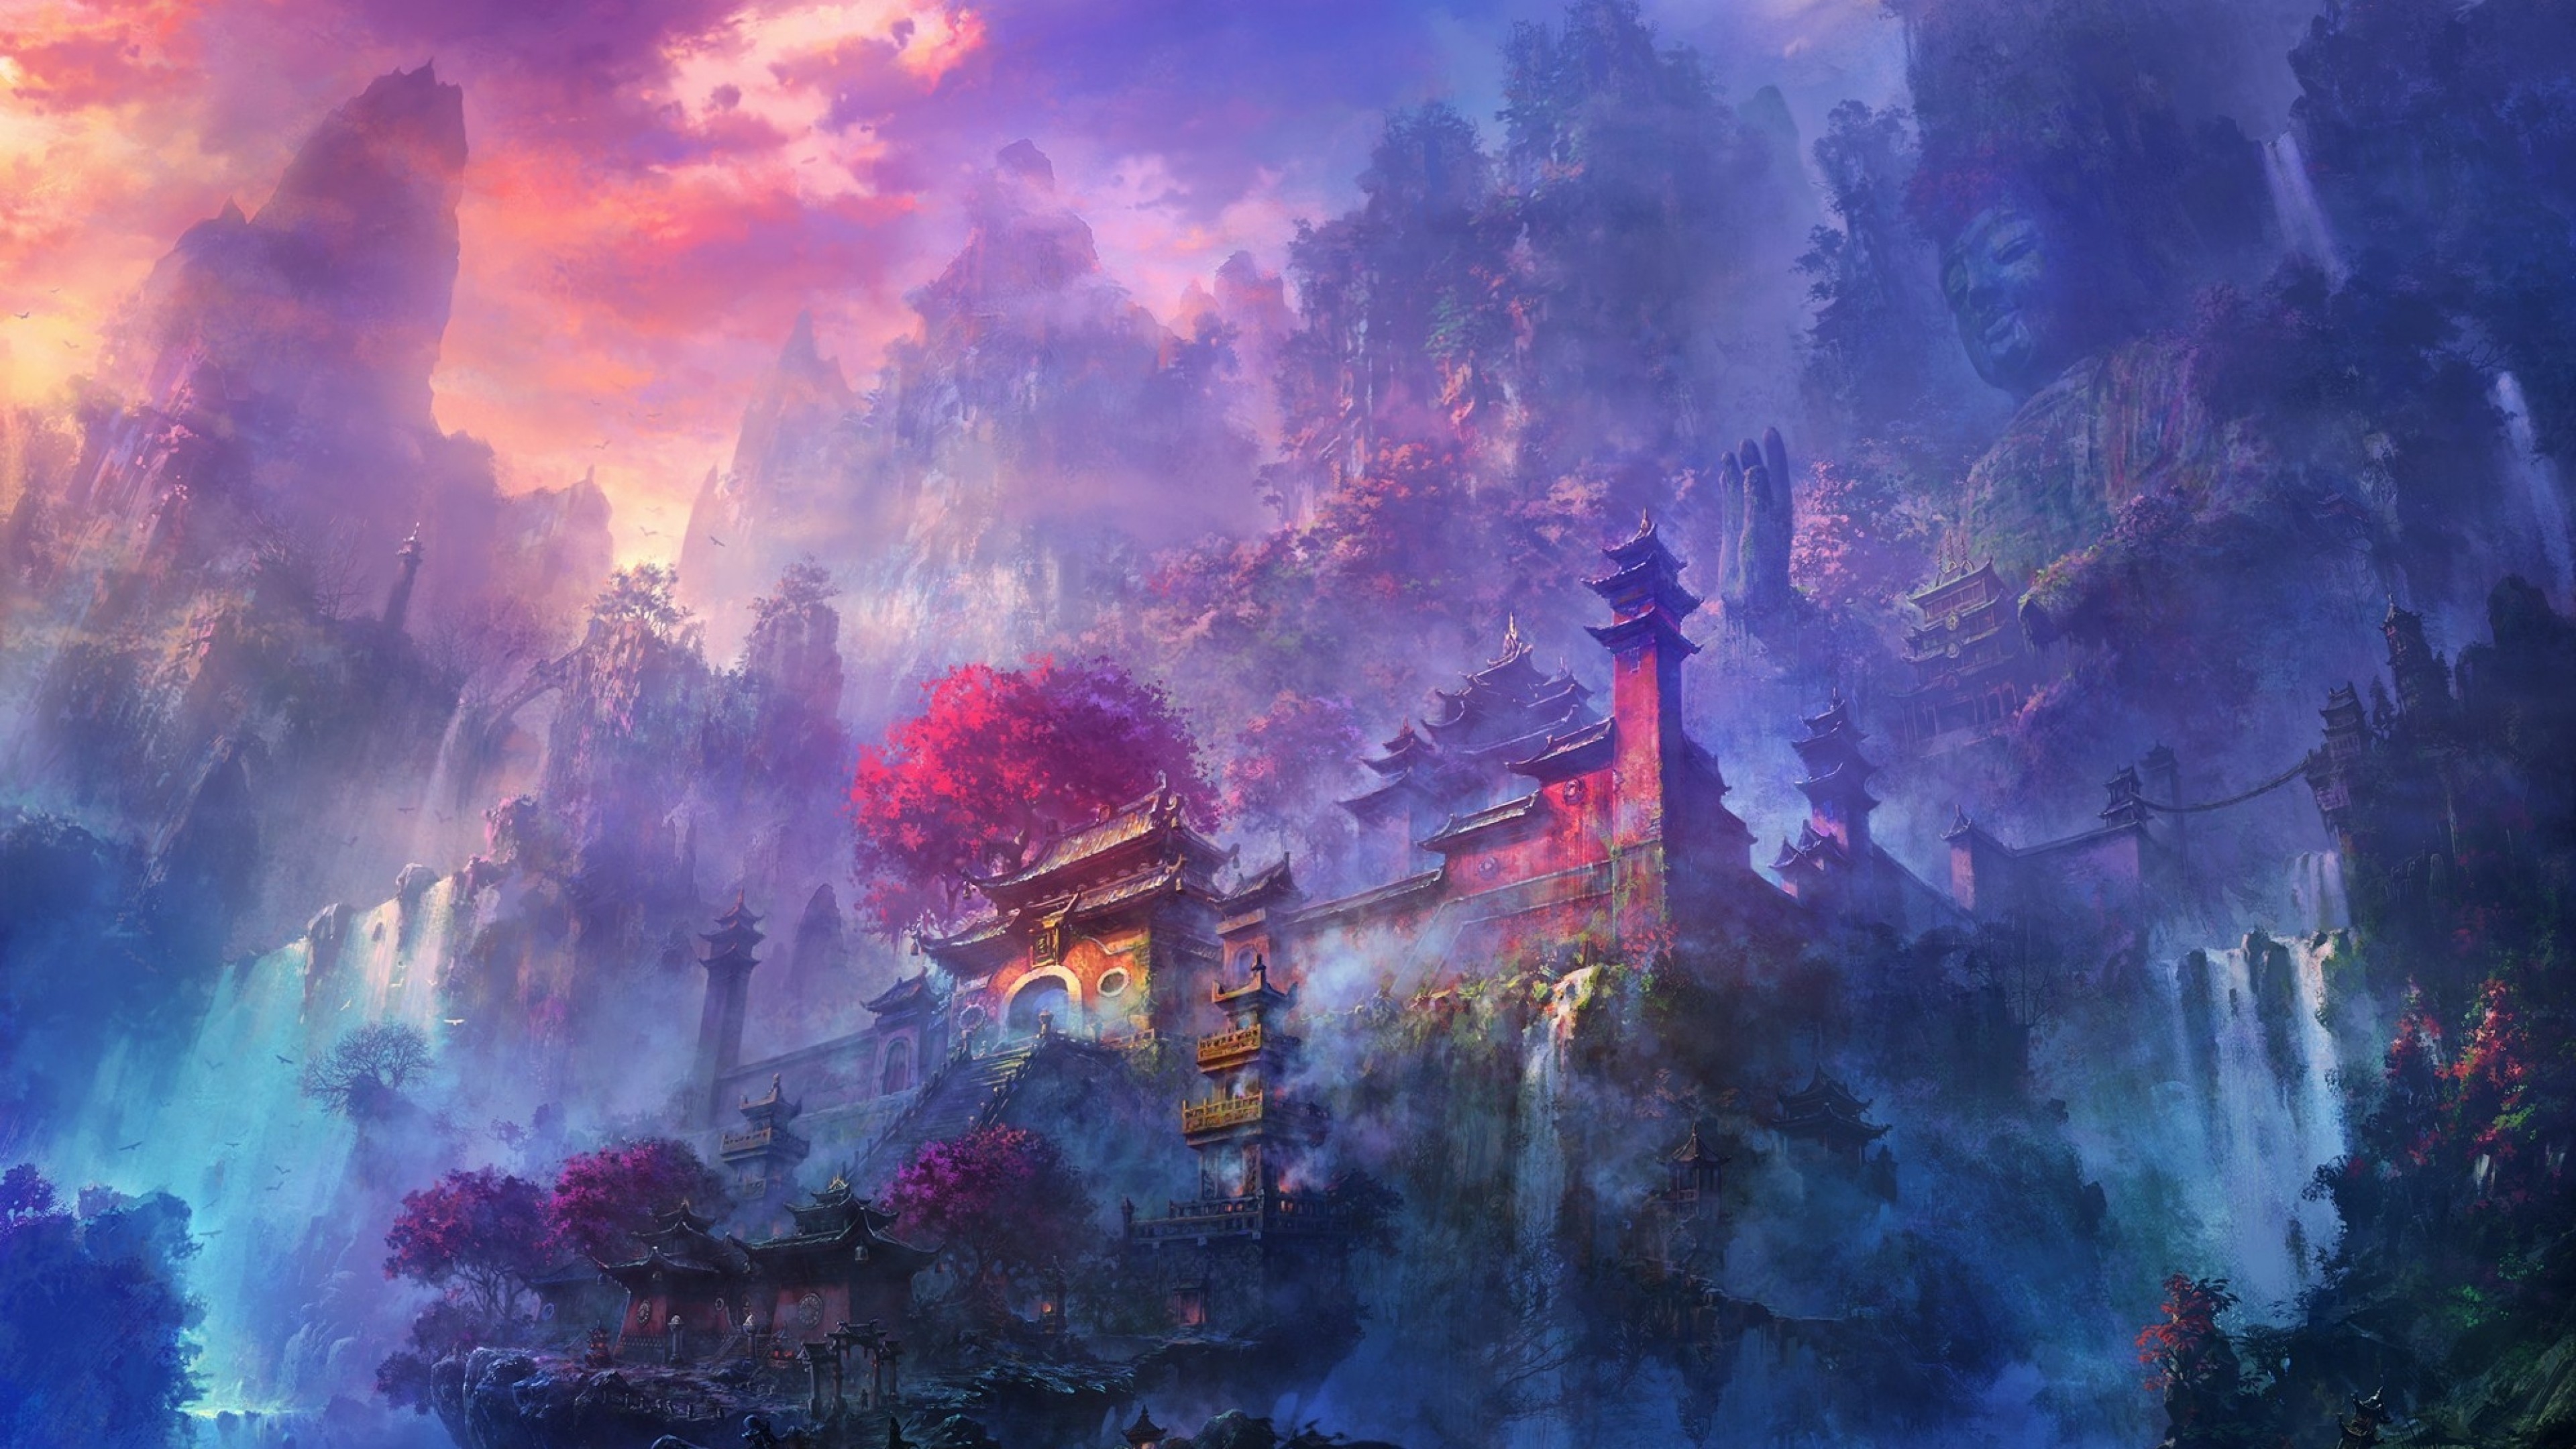 3840x2160 Asian Temple, Landscape, Buda, Waterfall, Mountains, Sky, Clouds, Fog